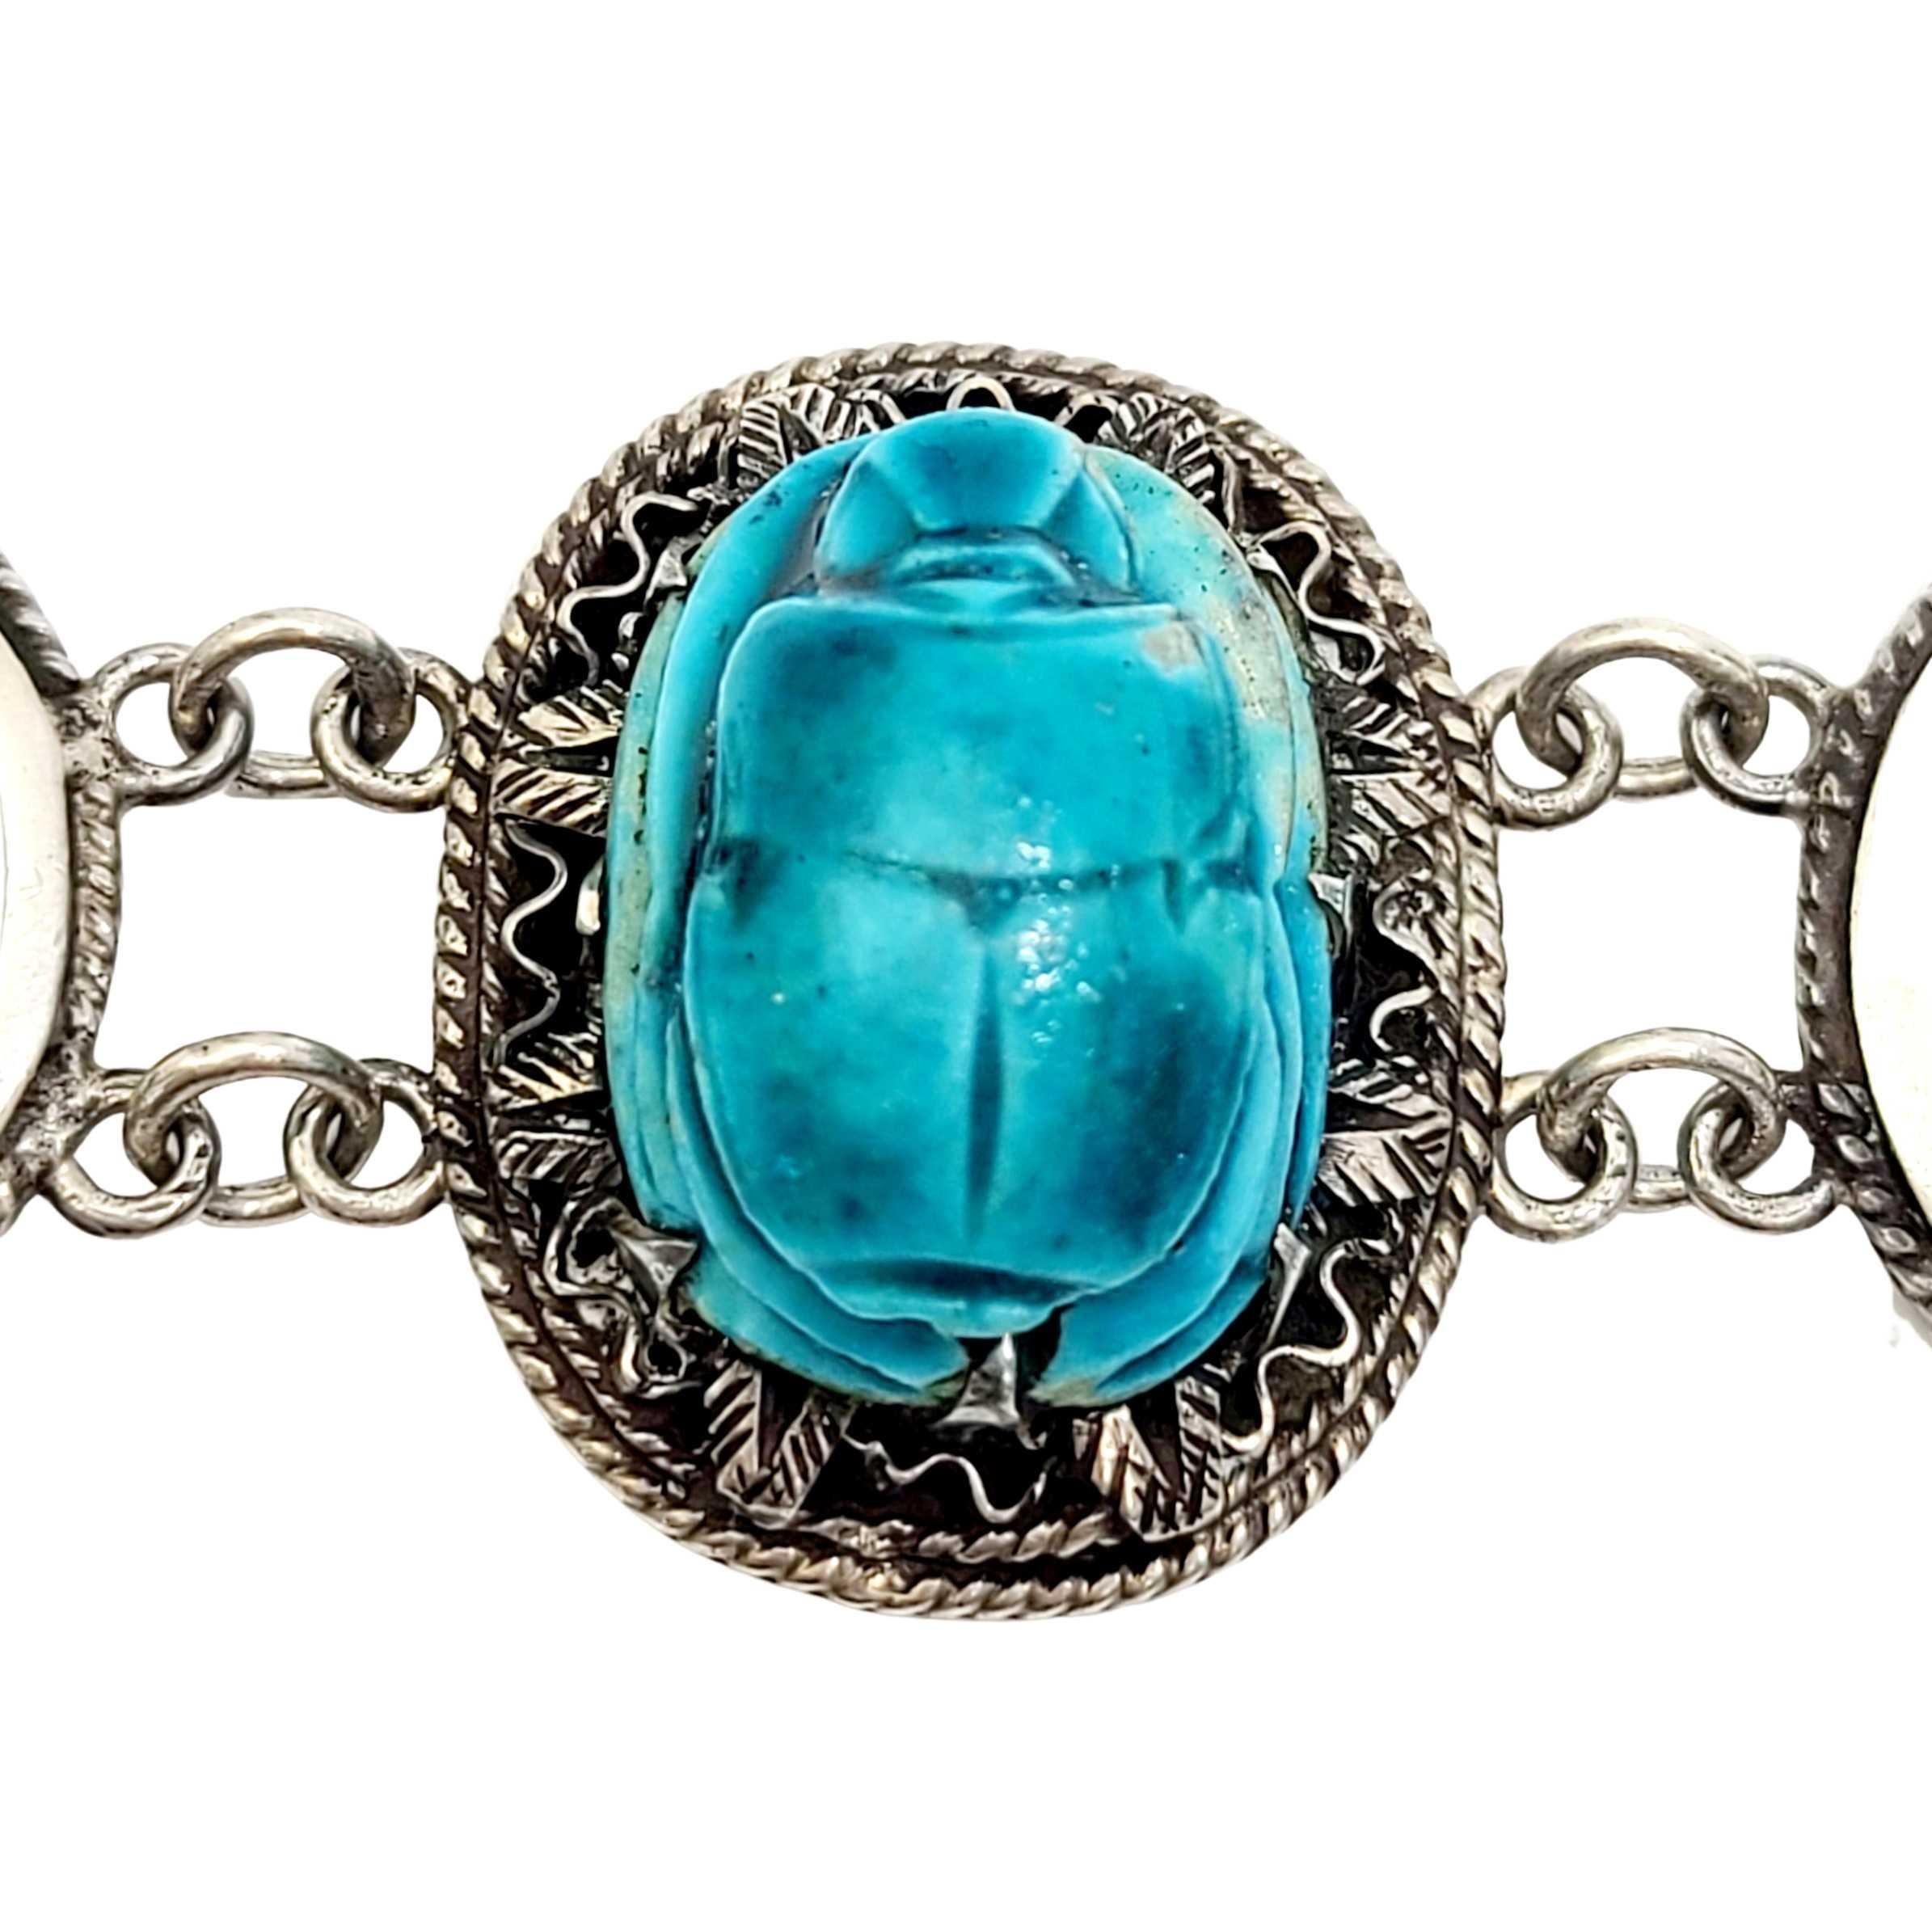 Women's Egyptian Revival Silver and Faience Scarab Bracelet